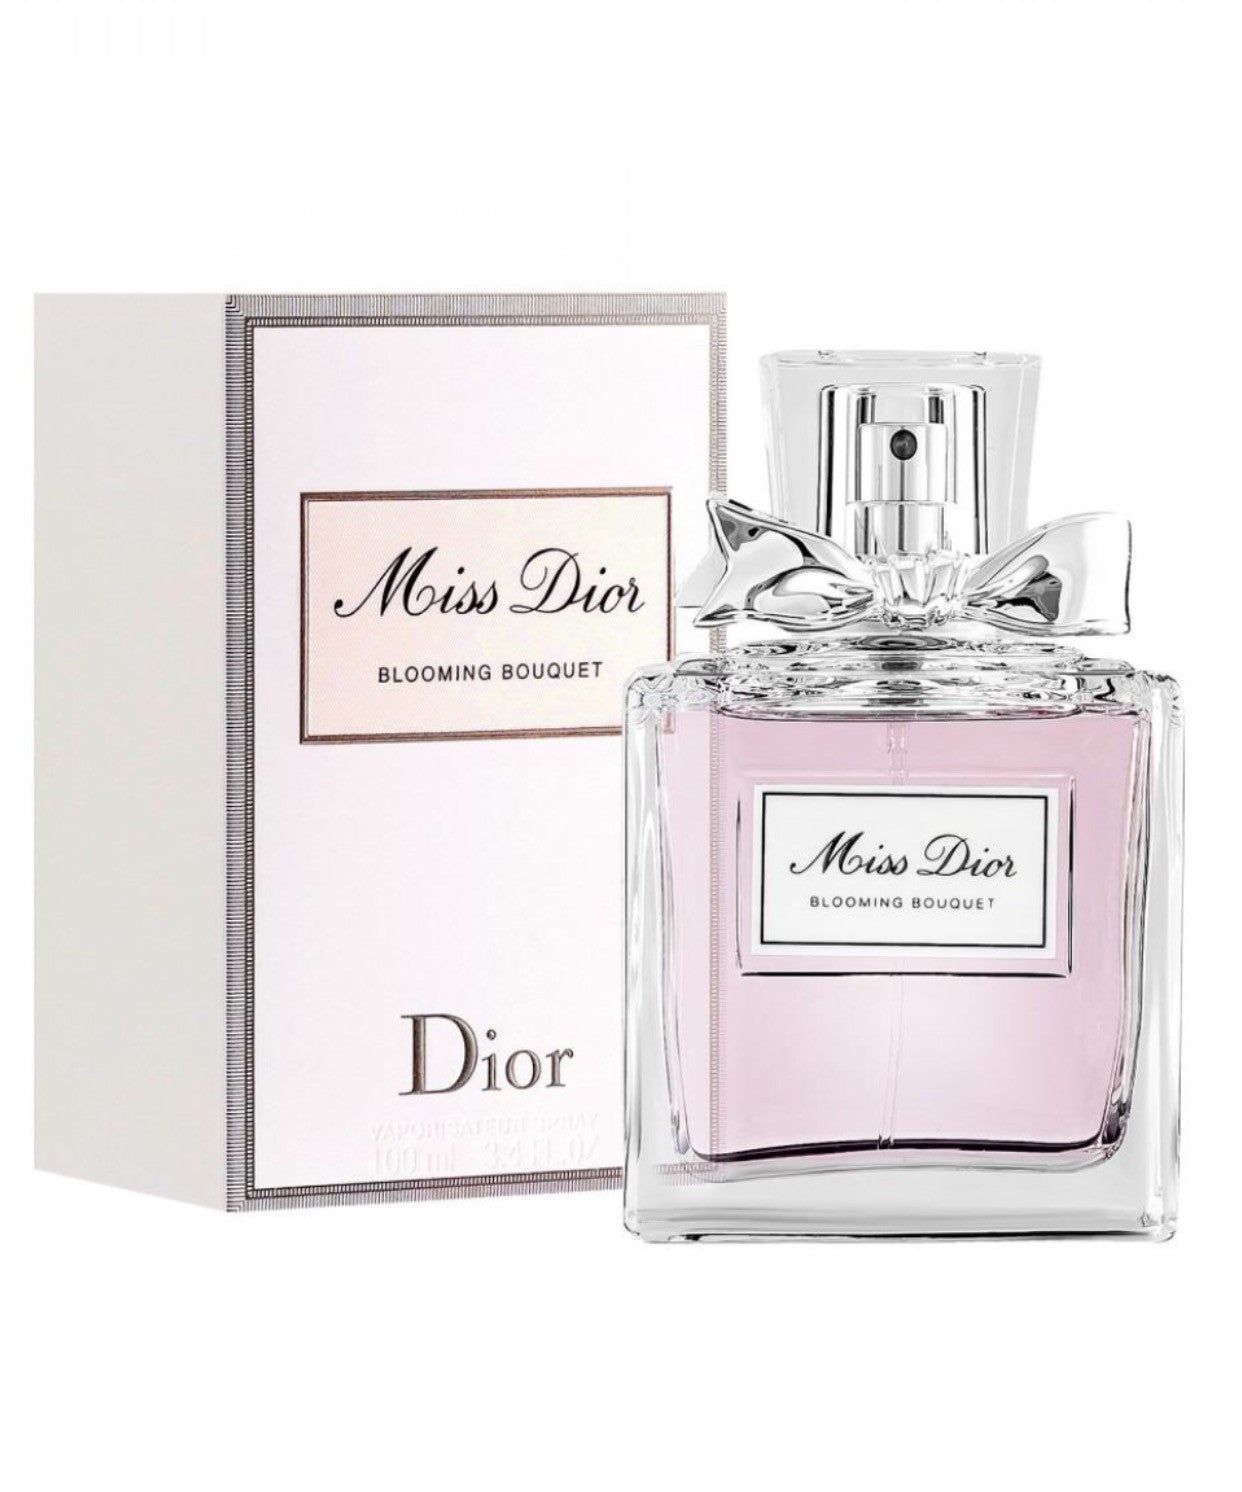 miss dior blooming bouquet 3.4 oz